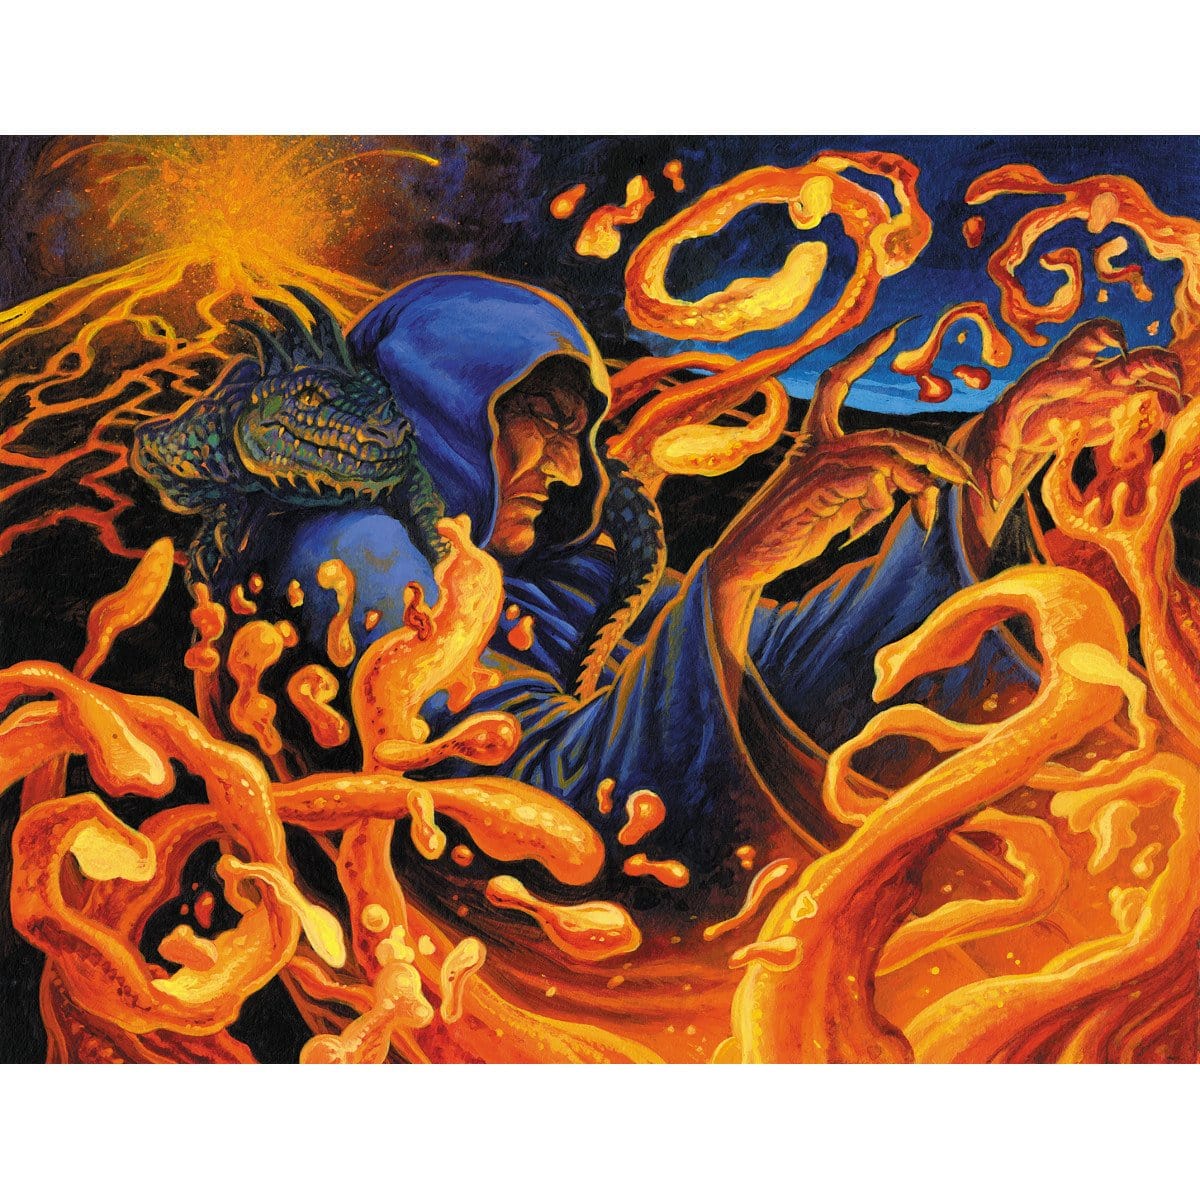 Grim Lavamancer Print - Print - Original Magic Art - Accessories for Magic the Gathering and other card games